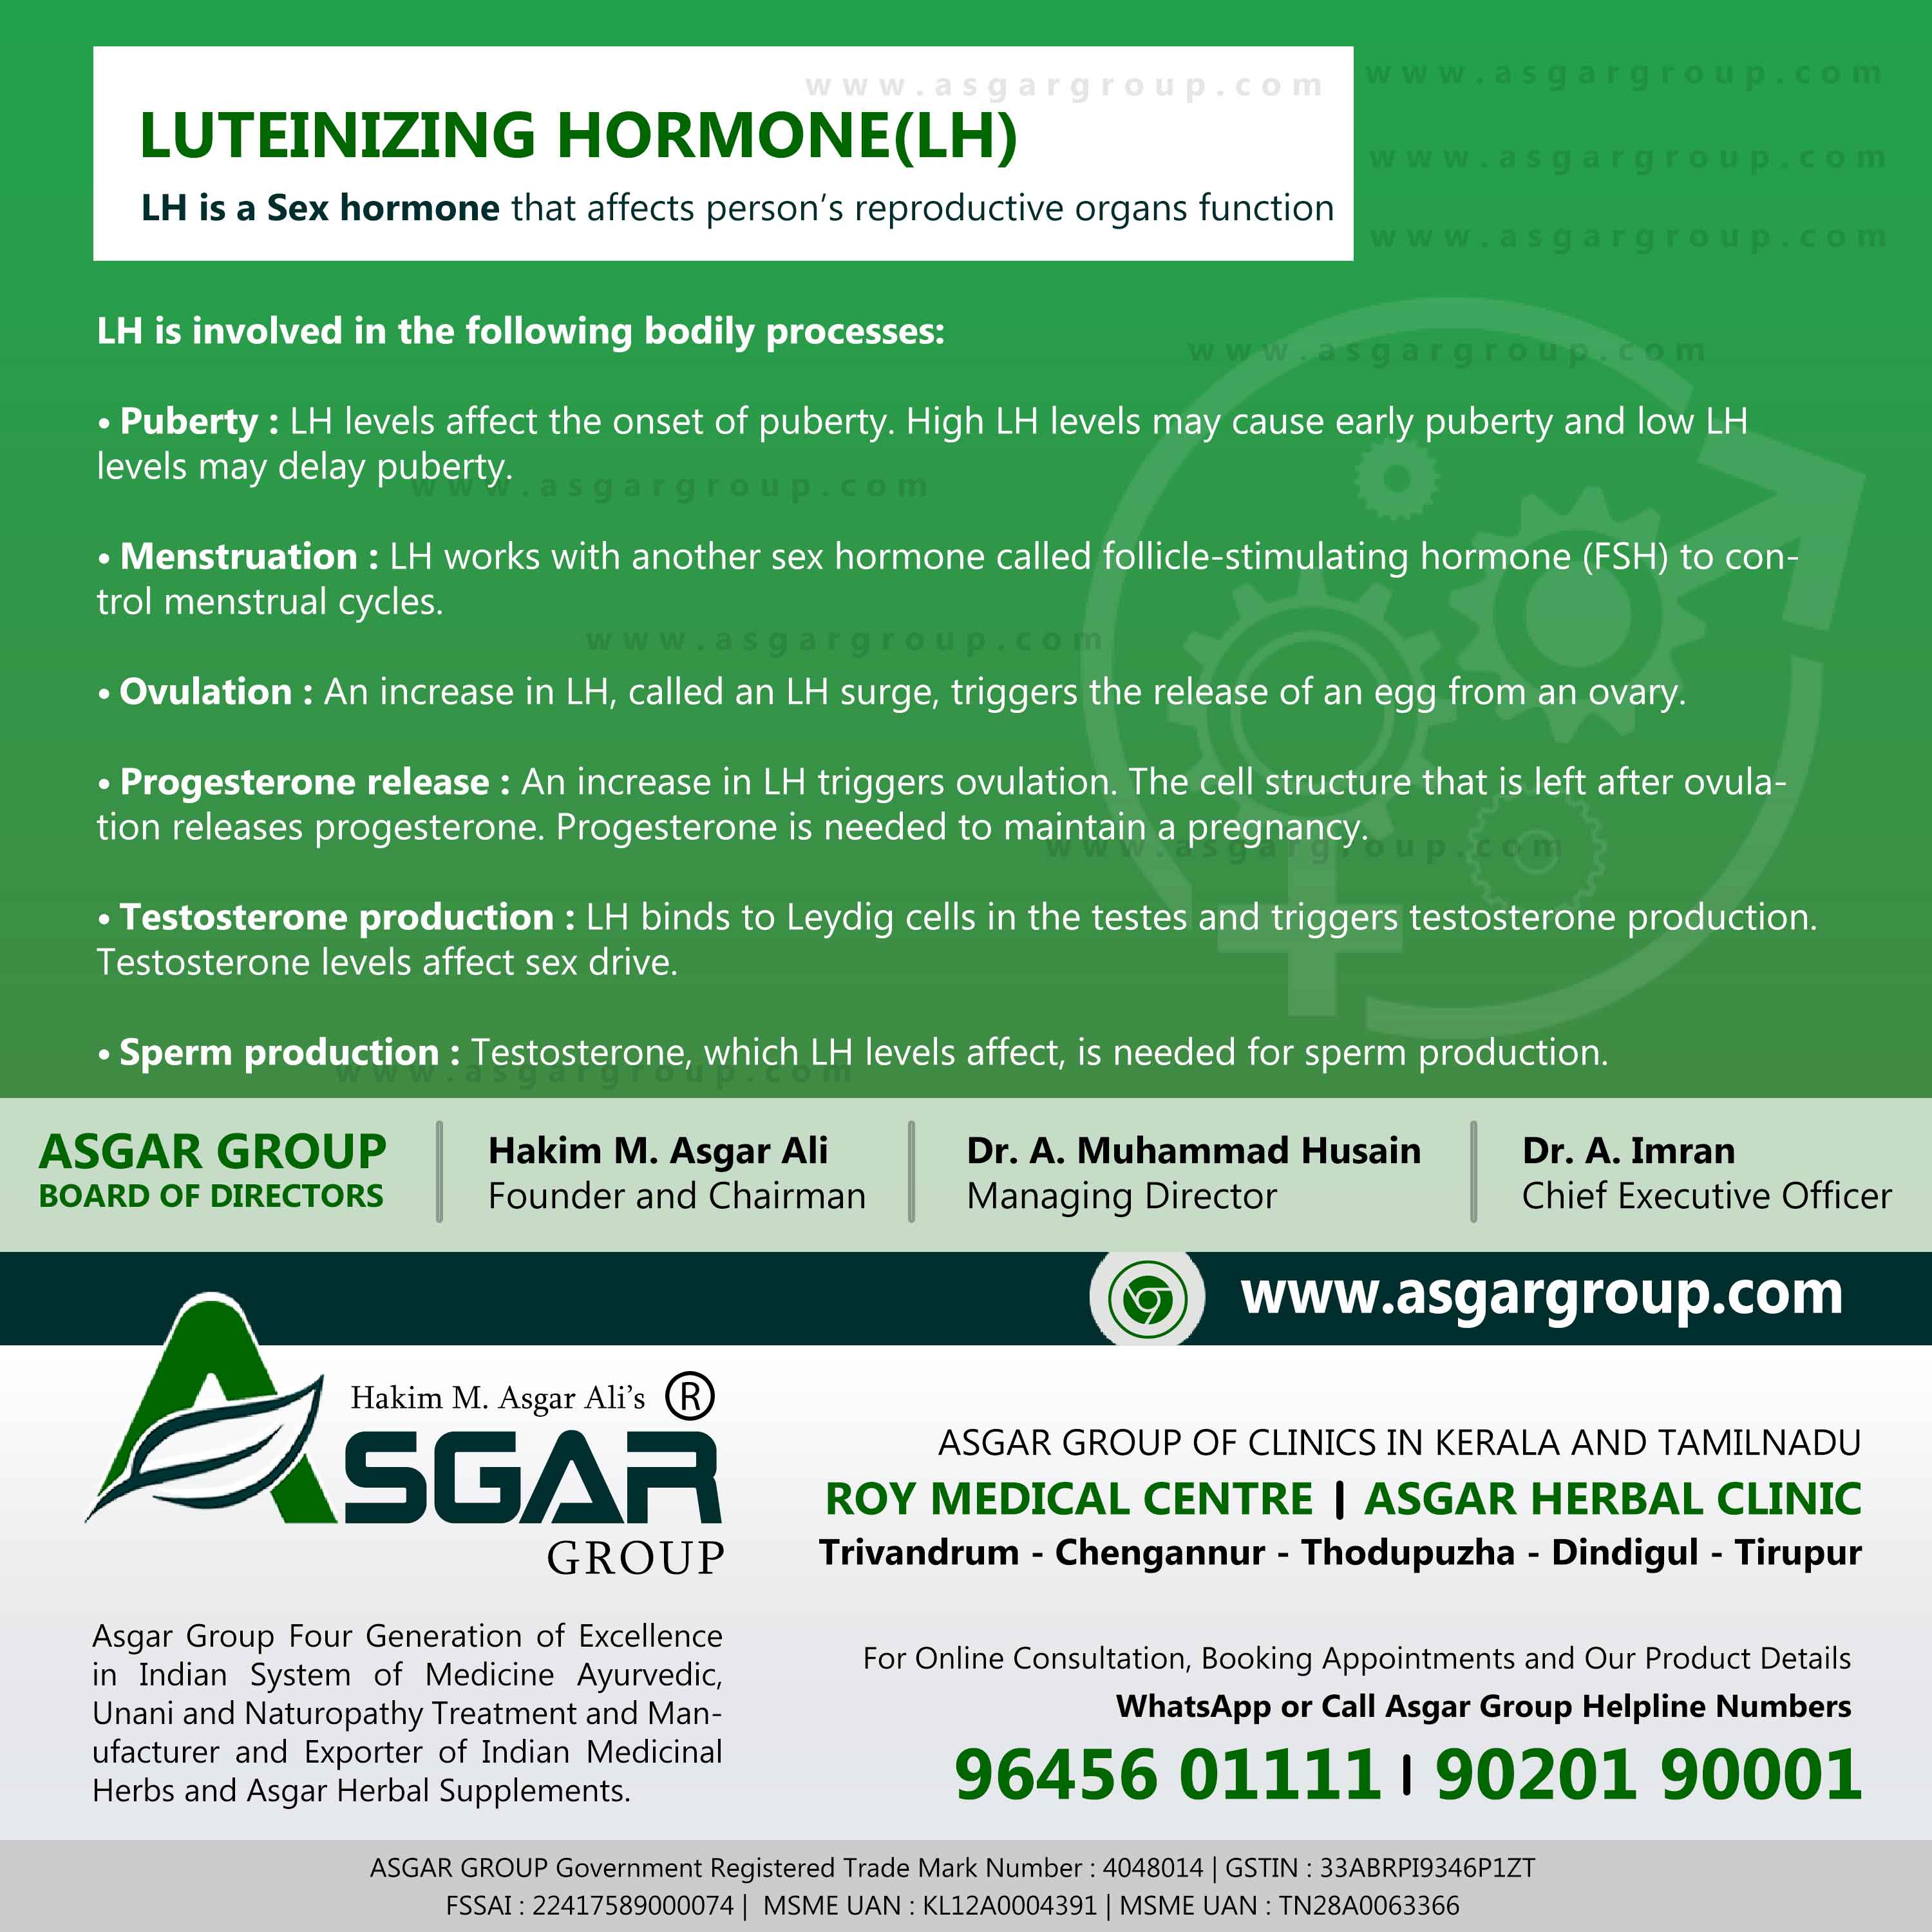 Luteinizing hormoneLH Blood Serum Test High Low abnoraml overview roy medical centre kerala asgar herbal group india